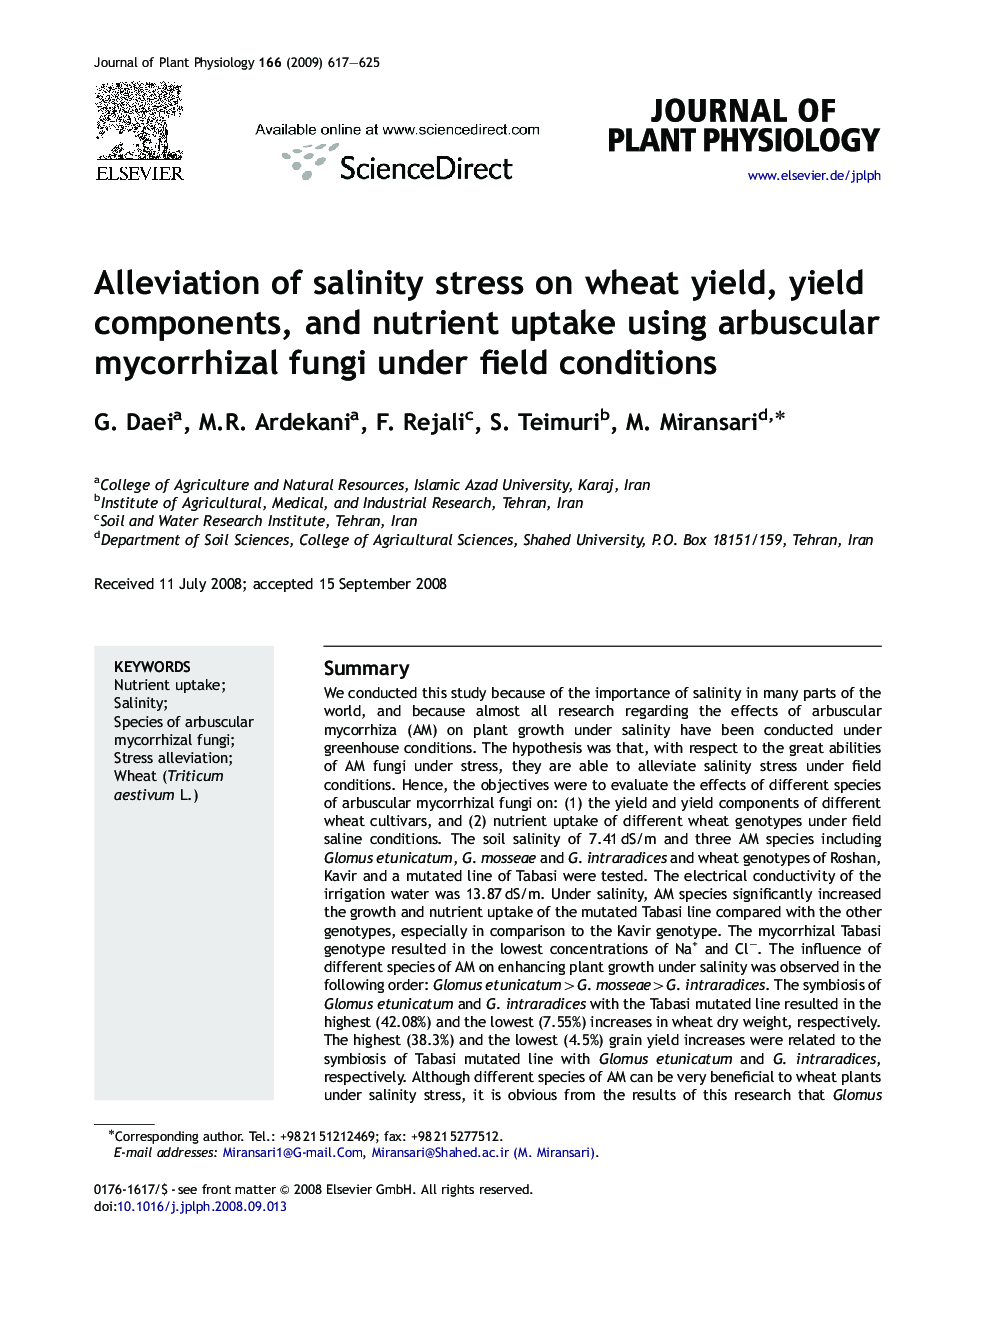 Alleviation of salinity stress on wheat yield, yield components, and nutrient uptake using arbuscular mycorrhizal fungi under field conditions